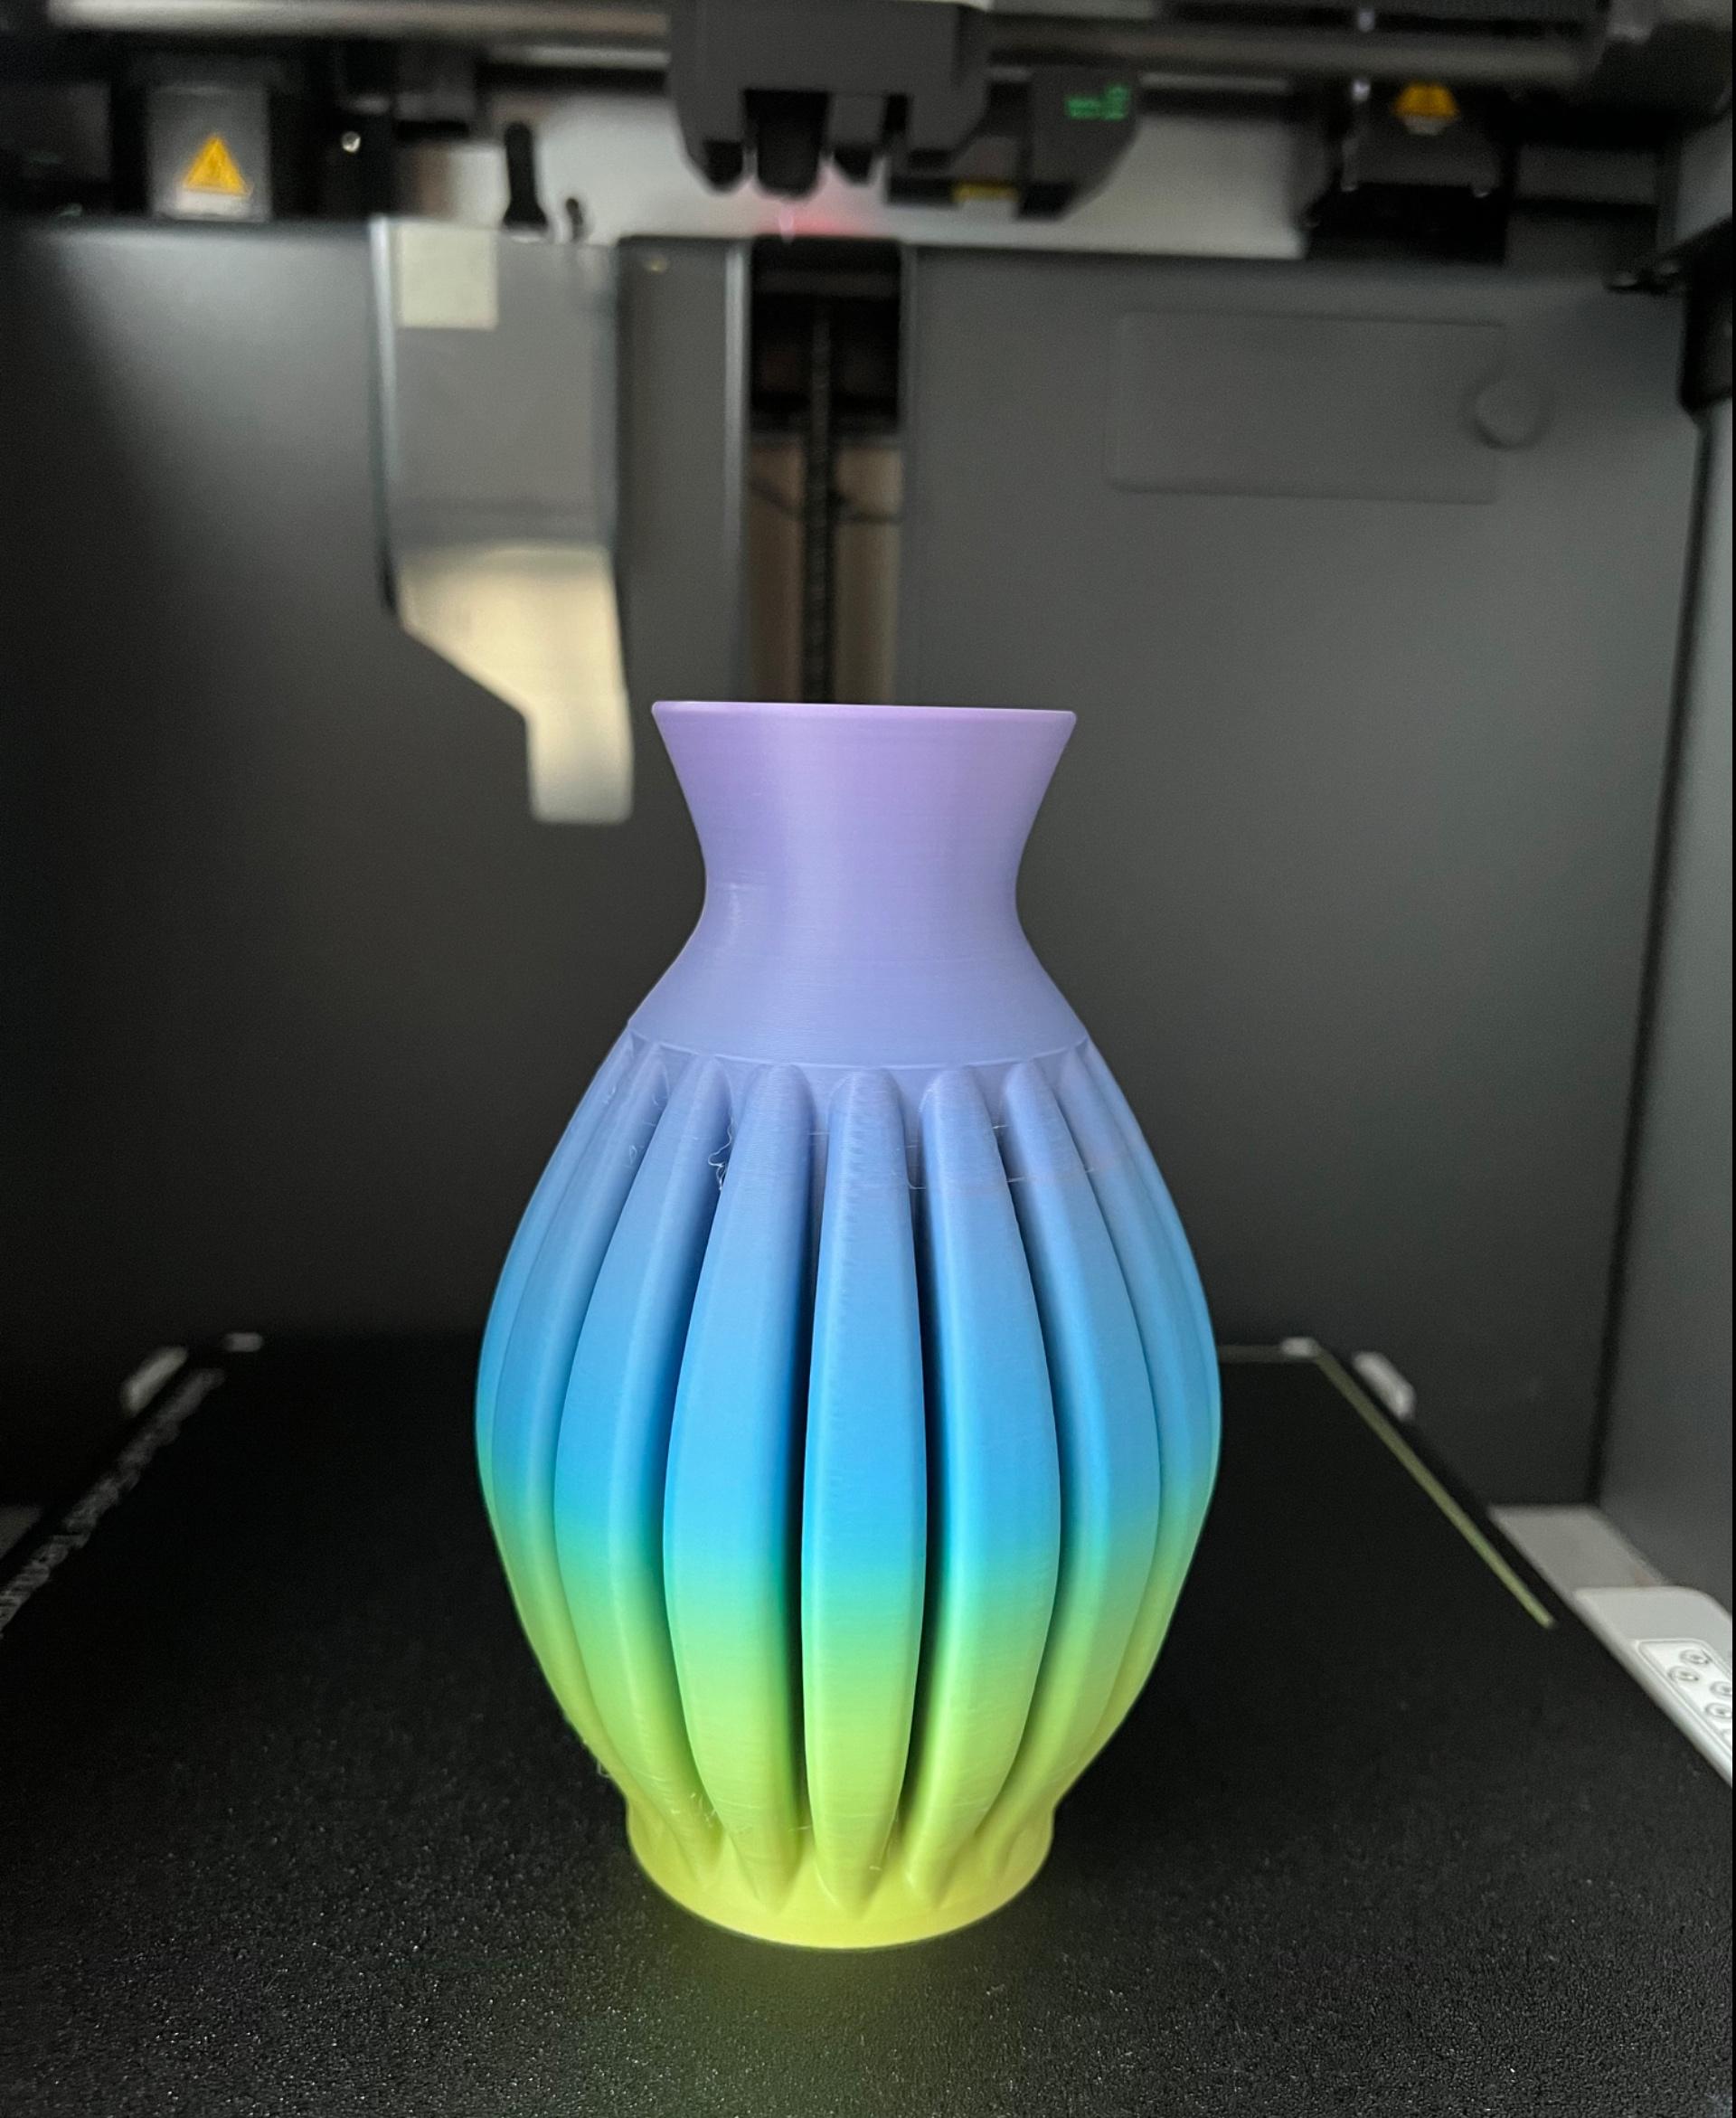 Vase 6.3.3.stl - Check out this beautiful vase! 
Filament Geeetech rainbow - 3d model